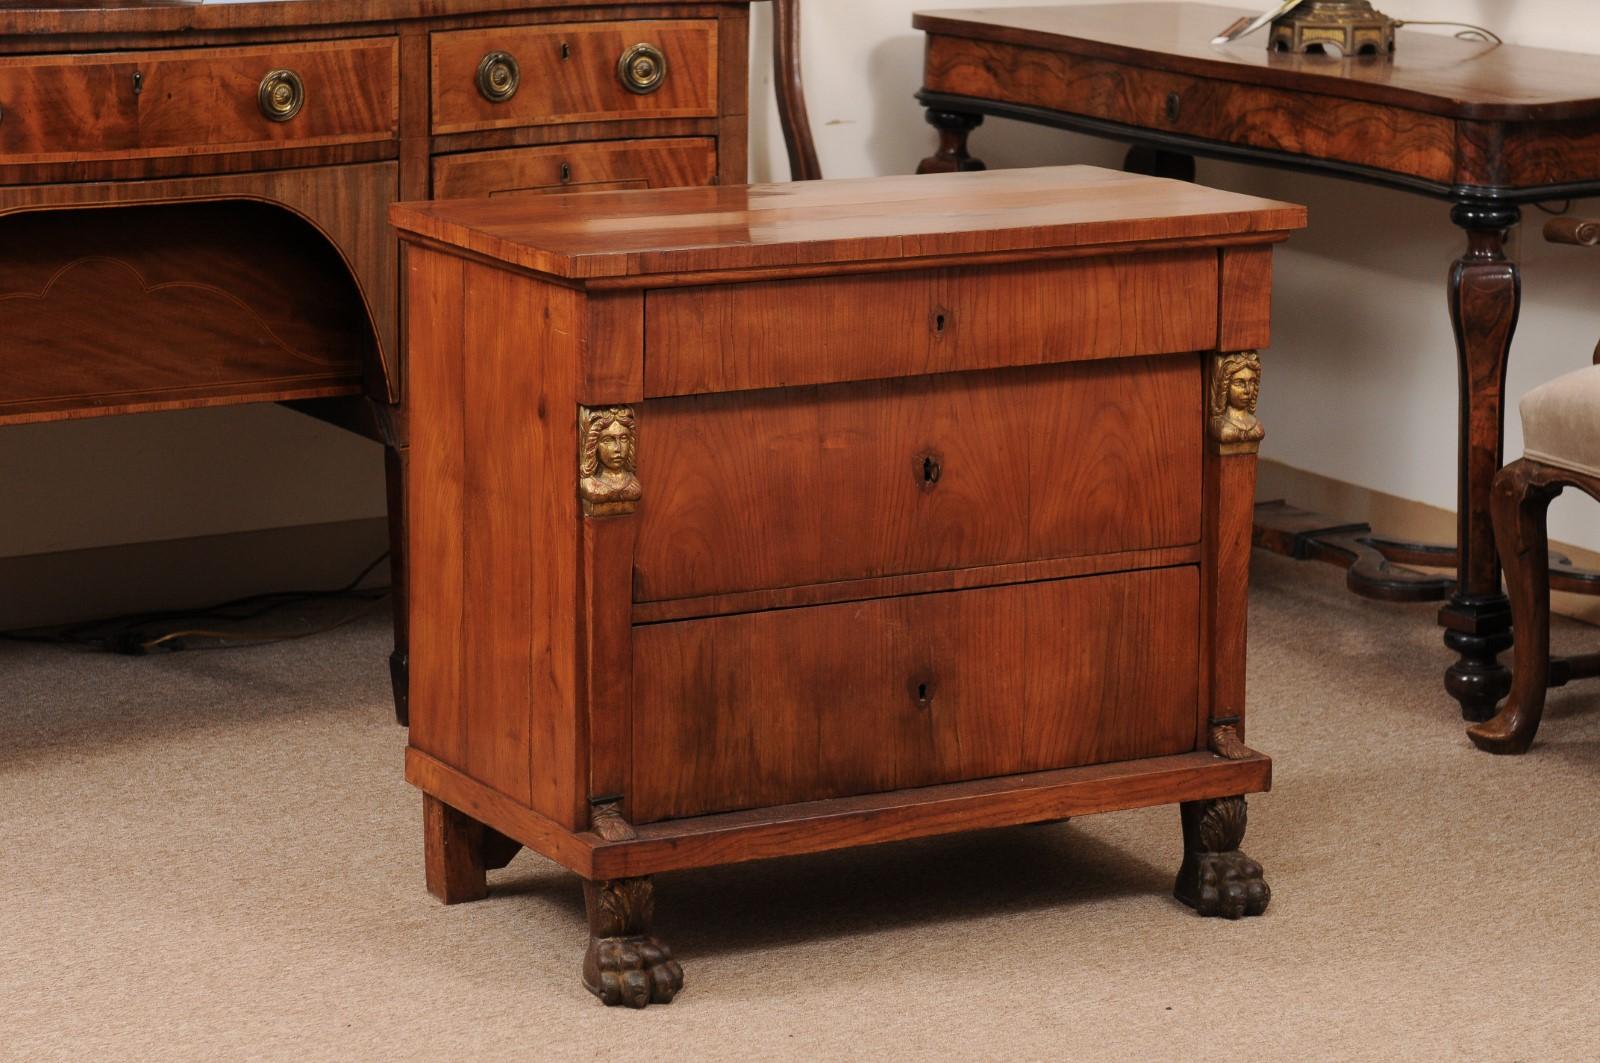 Early 19th Century Italian Empire Petite Commode in Fruitwood with 3 Drawers, Ebonized Paw Feet, & Caryatid Detail